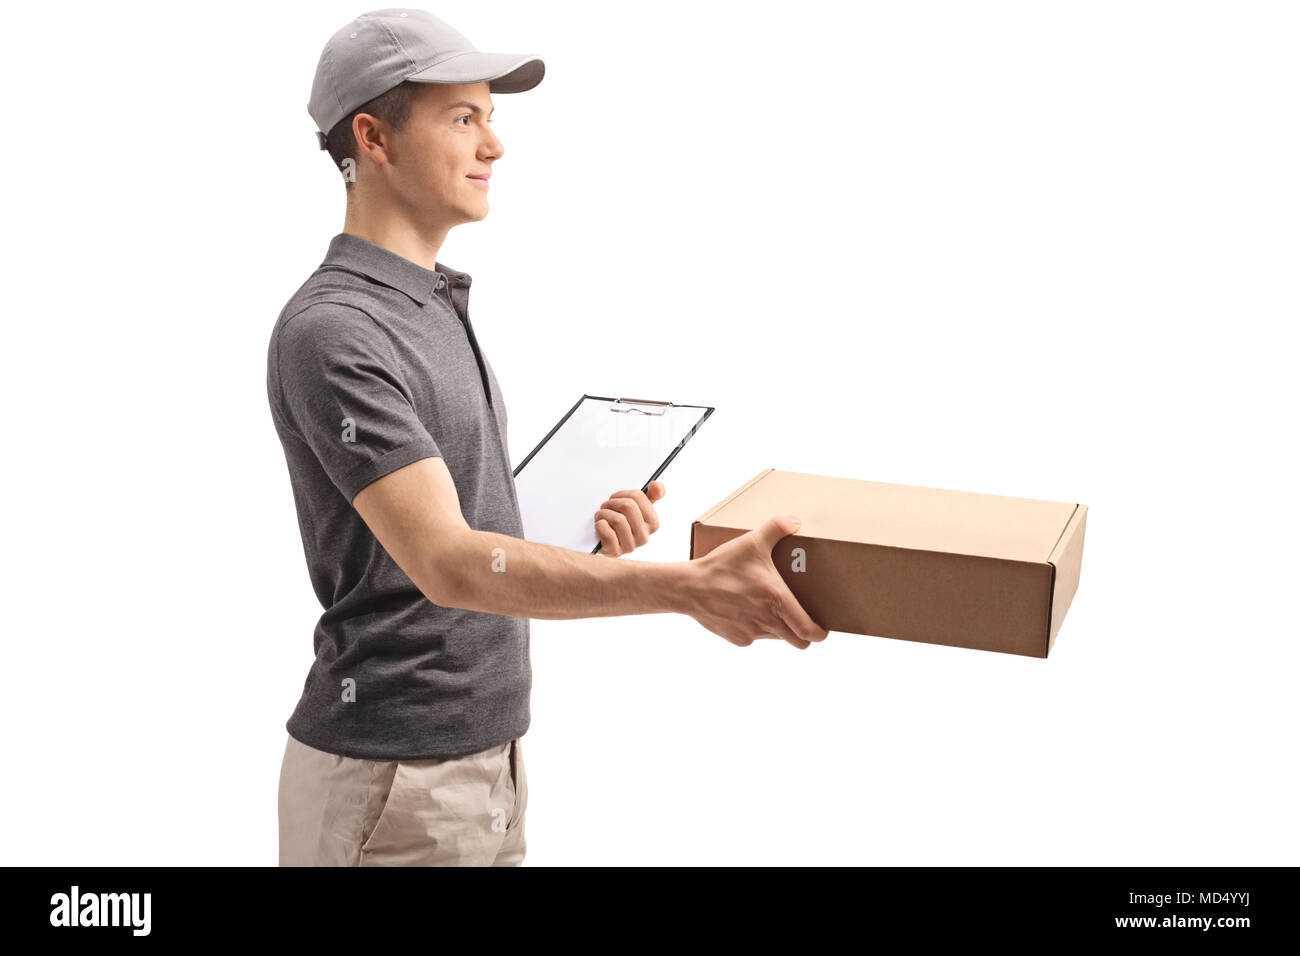 Teenage delivery boy giving a package isolated on white background Stock Photo